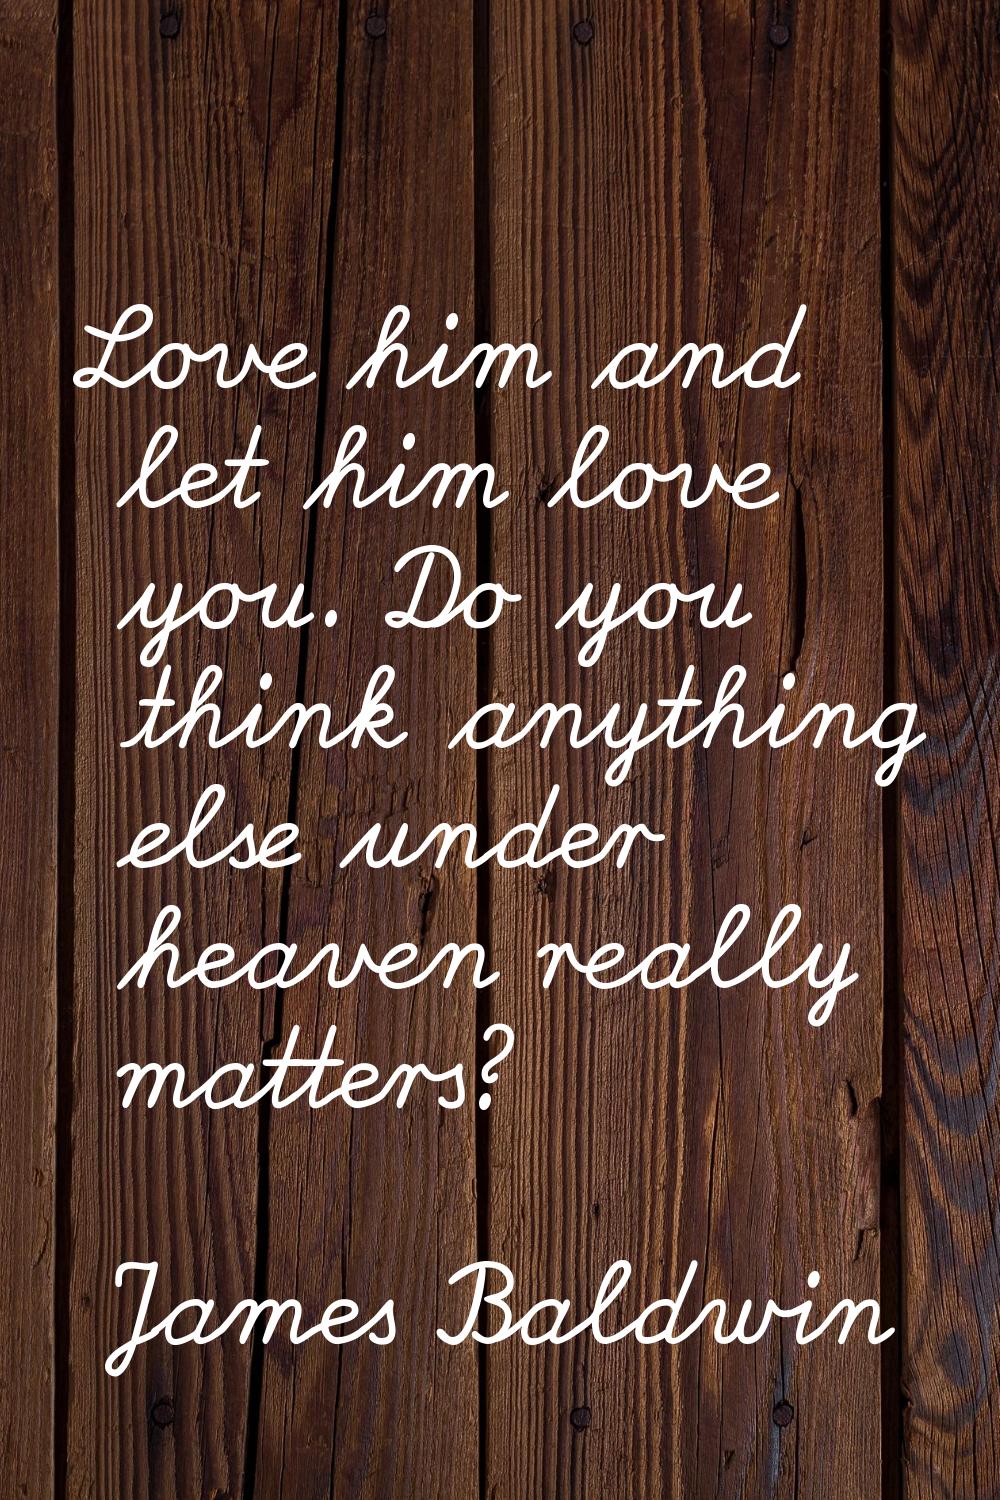 Love him and let him love you. Do you think anything else under heaven really matters?